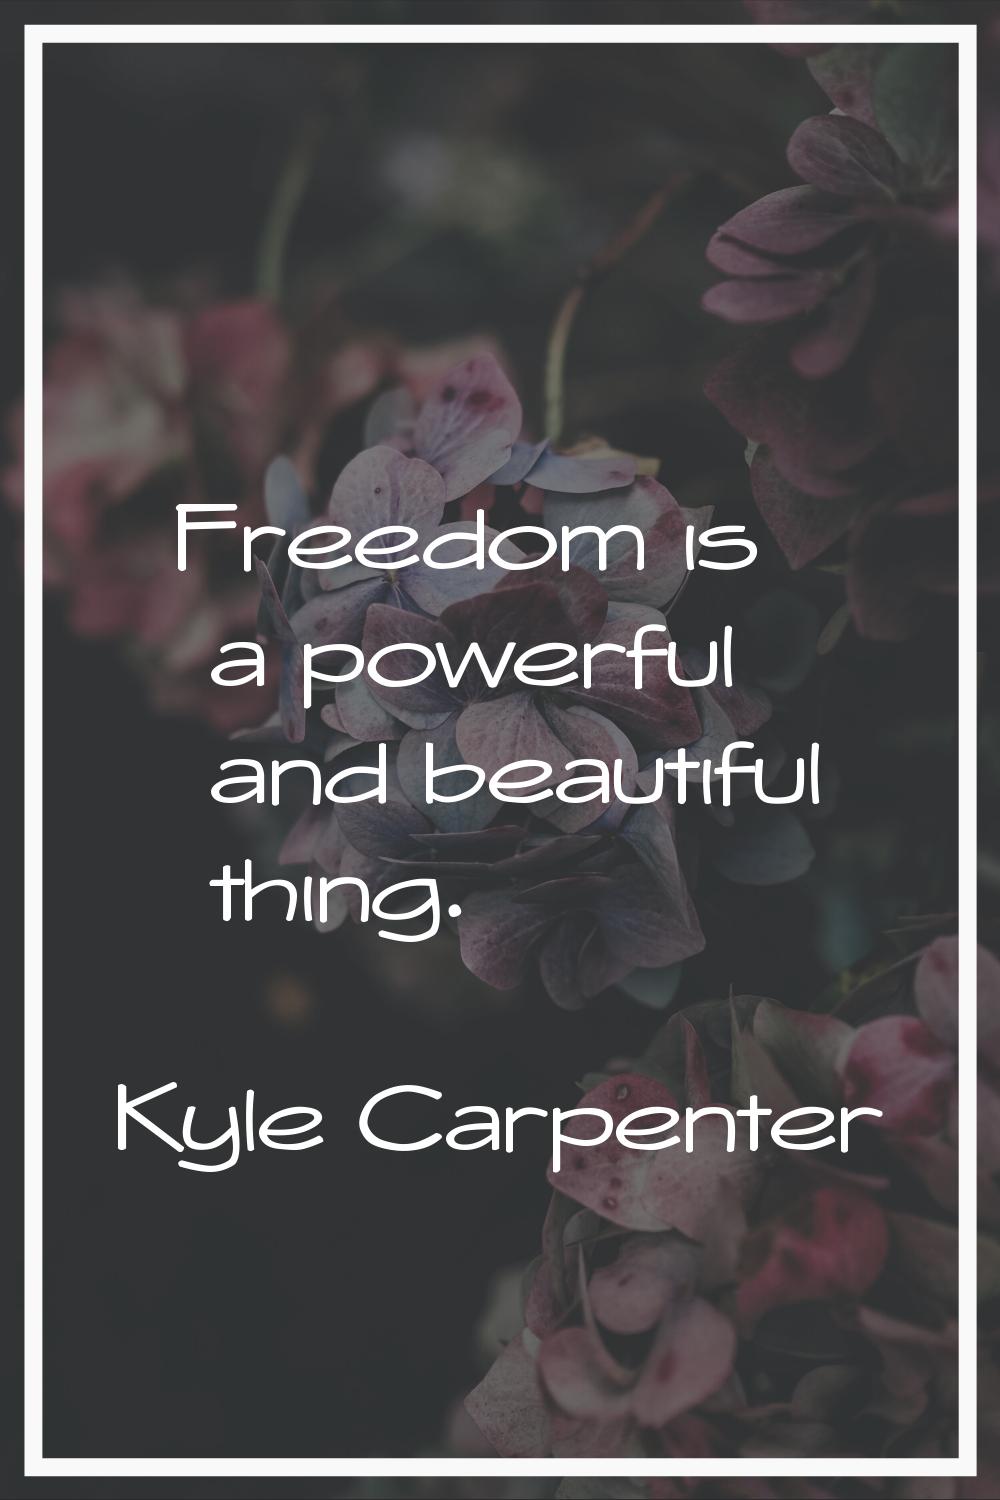 Freedom is a powerful and beautiful thing.